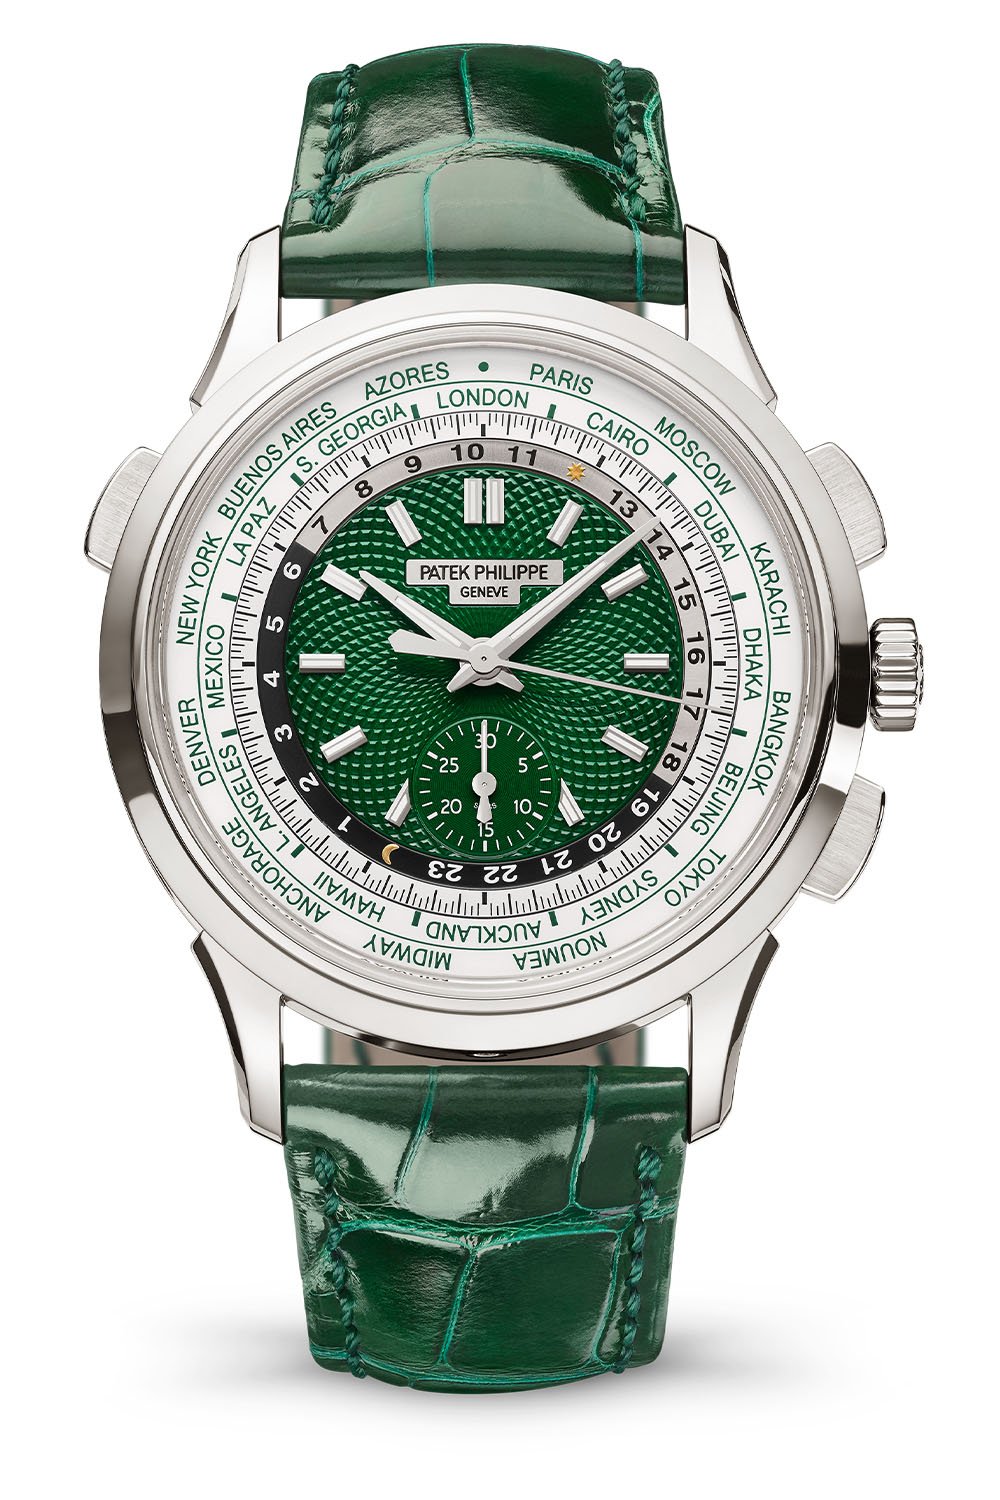 Patek Philippe Self-winding World Time flyback chronograph 5930P-001 platinum green dial